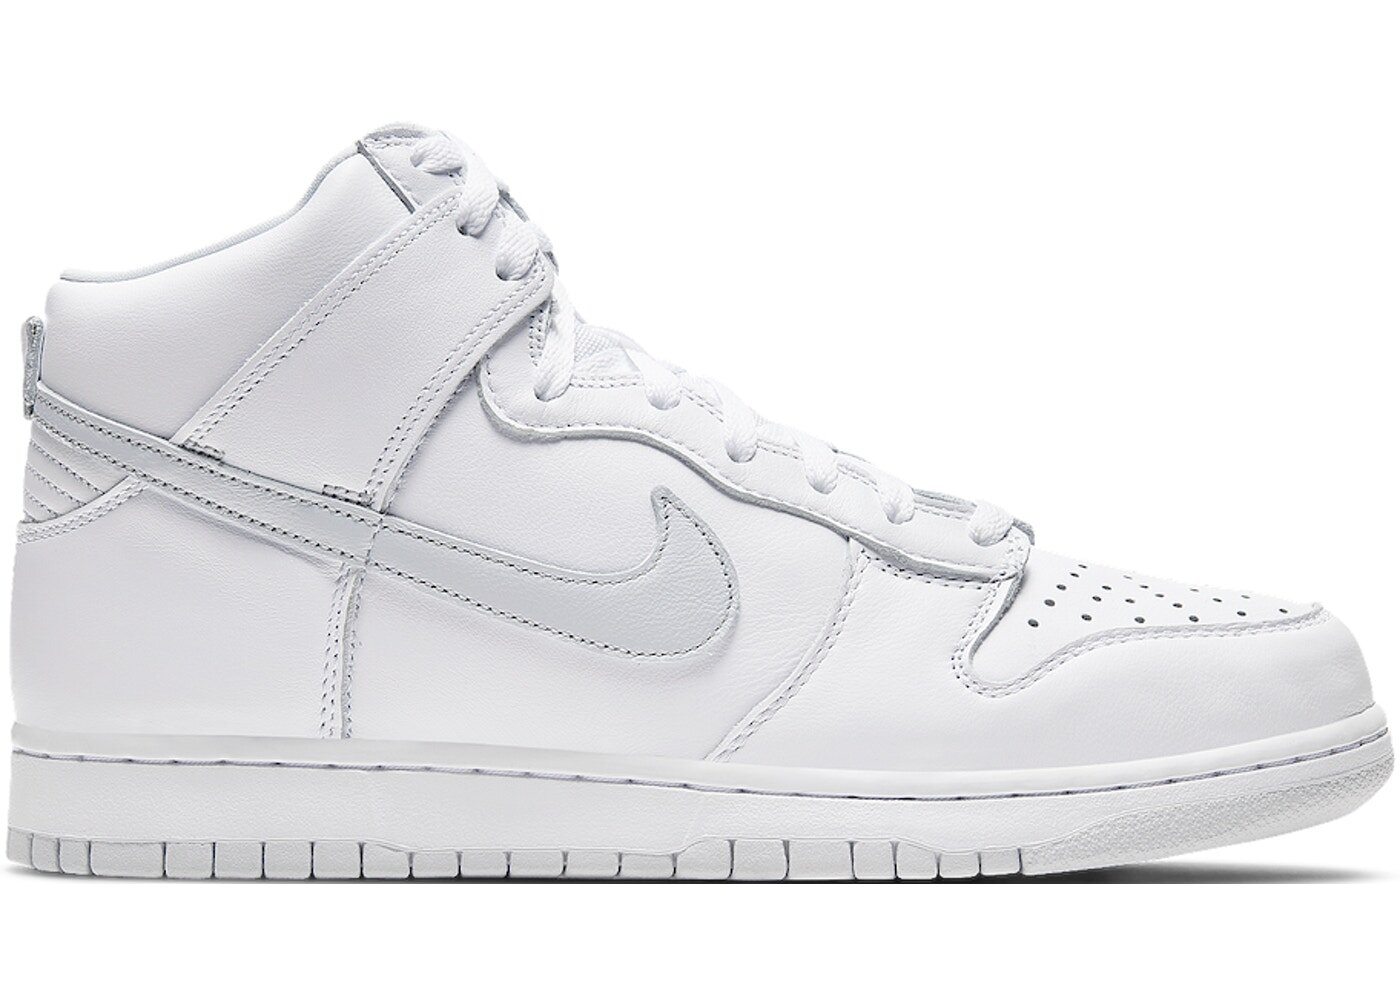 Now Available: Nike Dunk High SP 